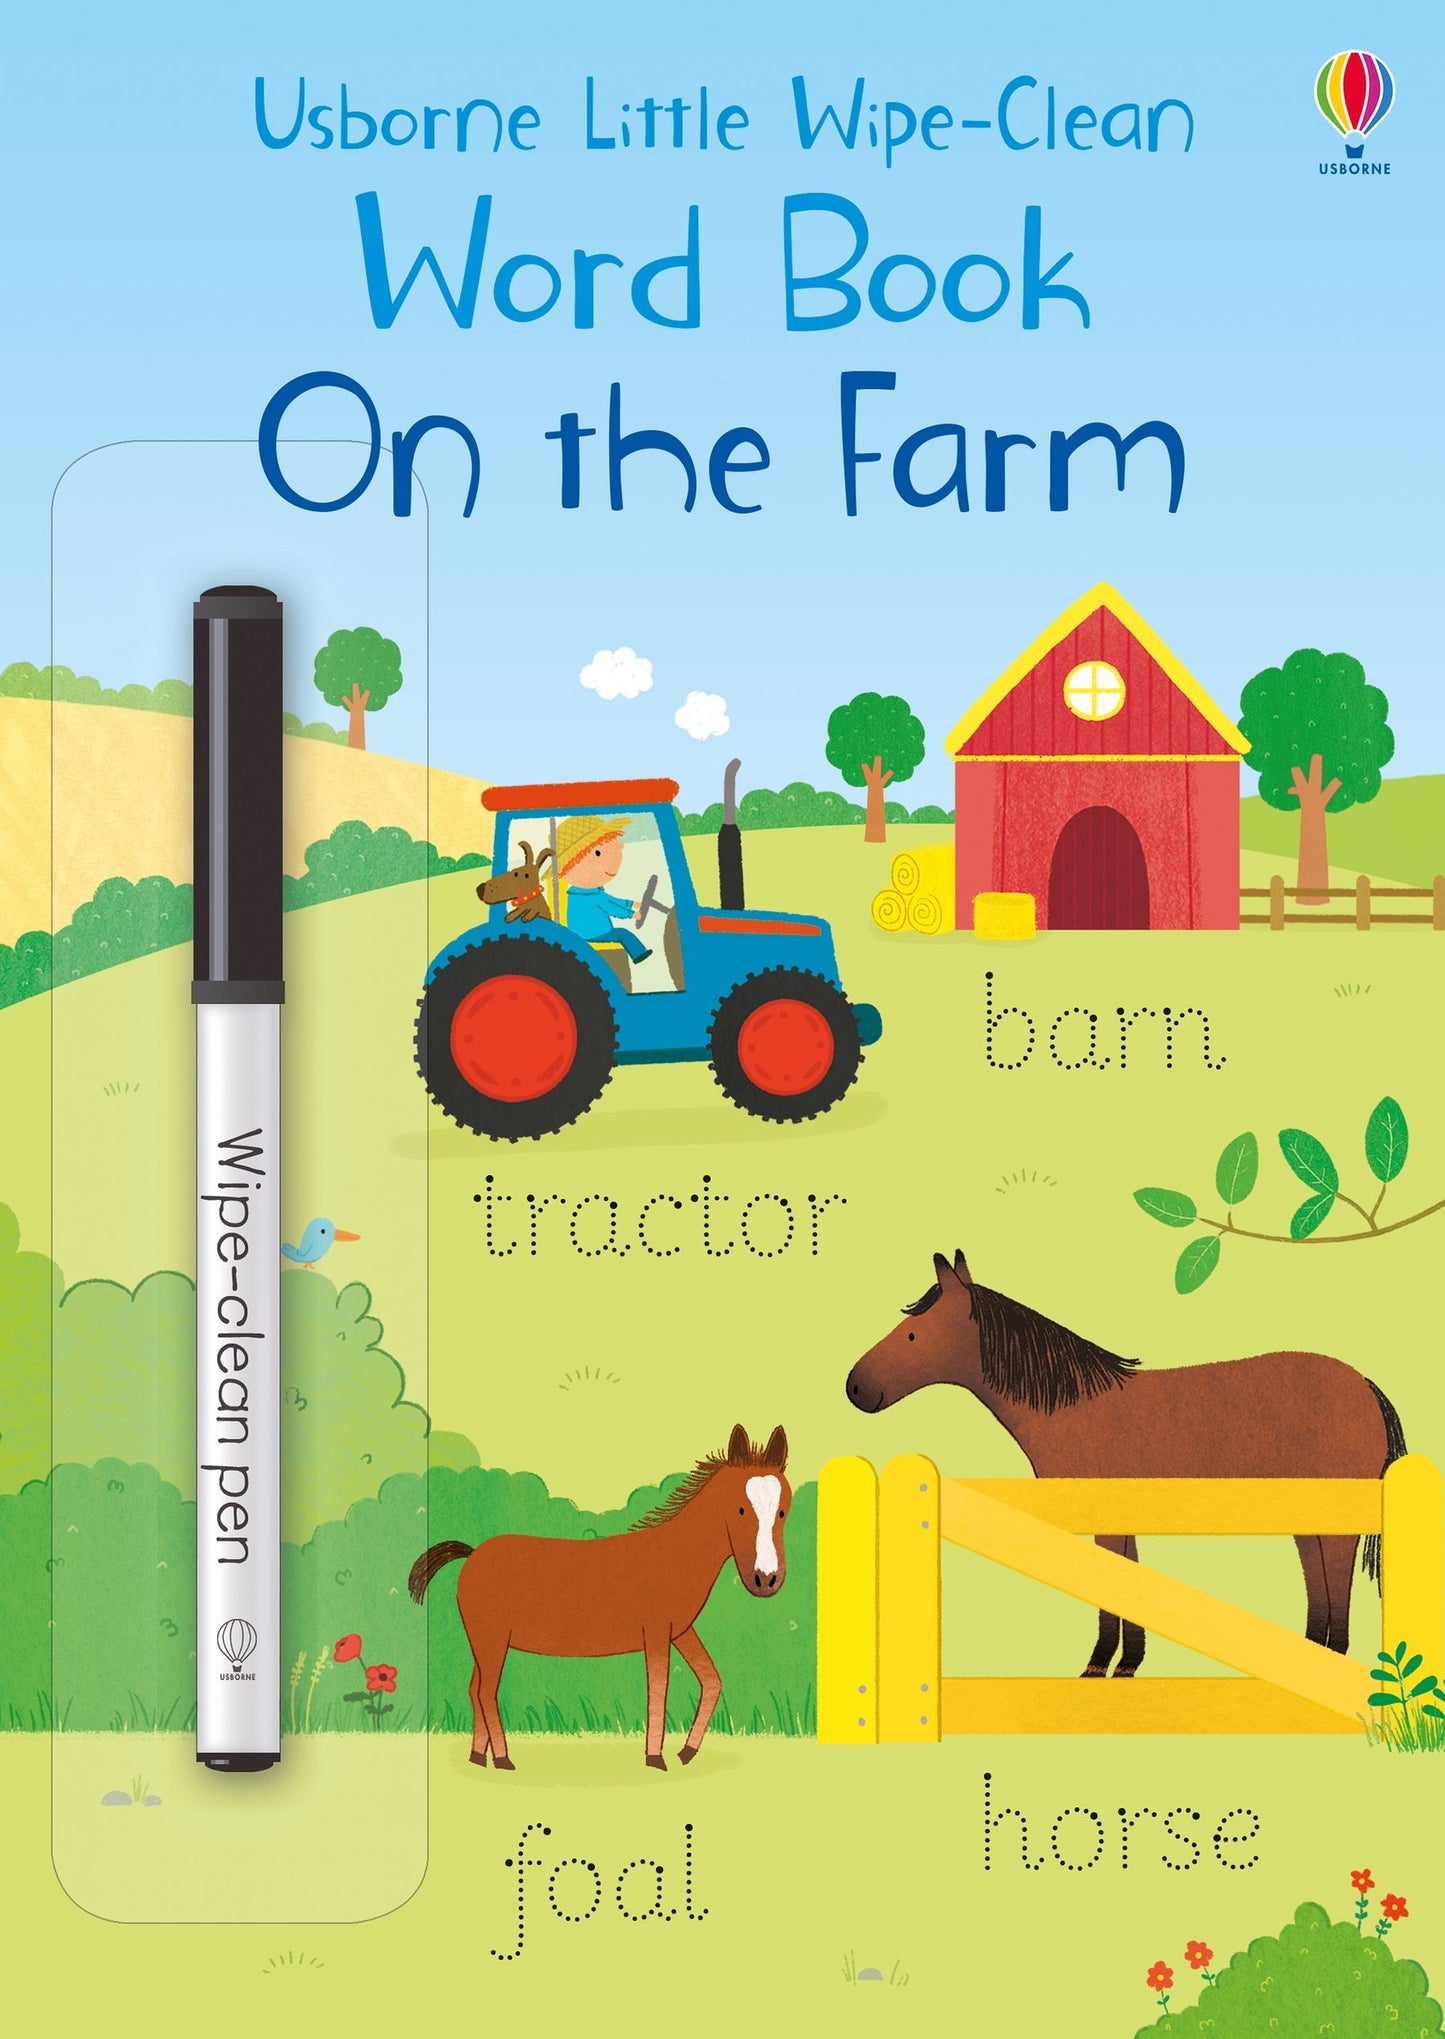 Little Wipe-Clean Word Book On the Farm